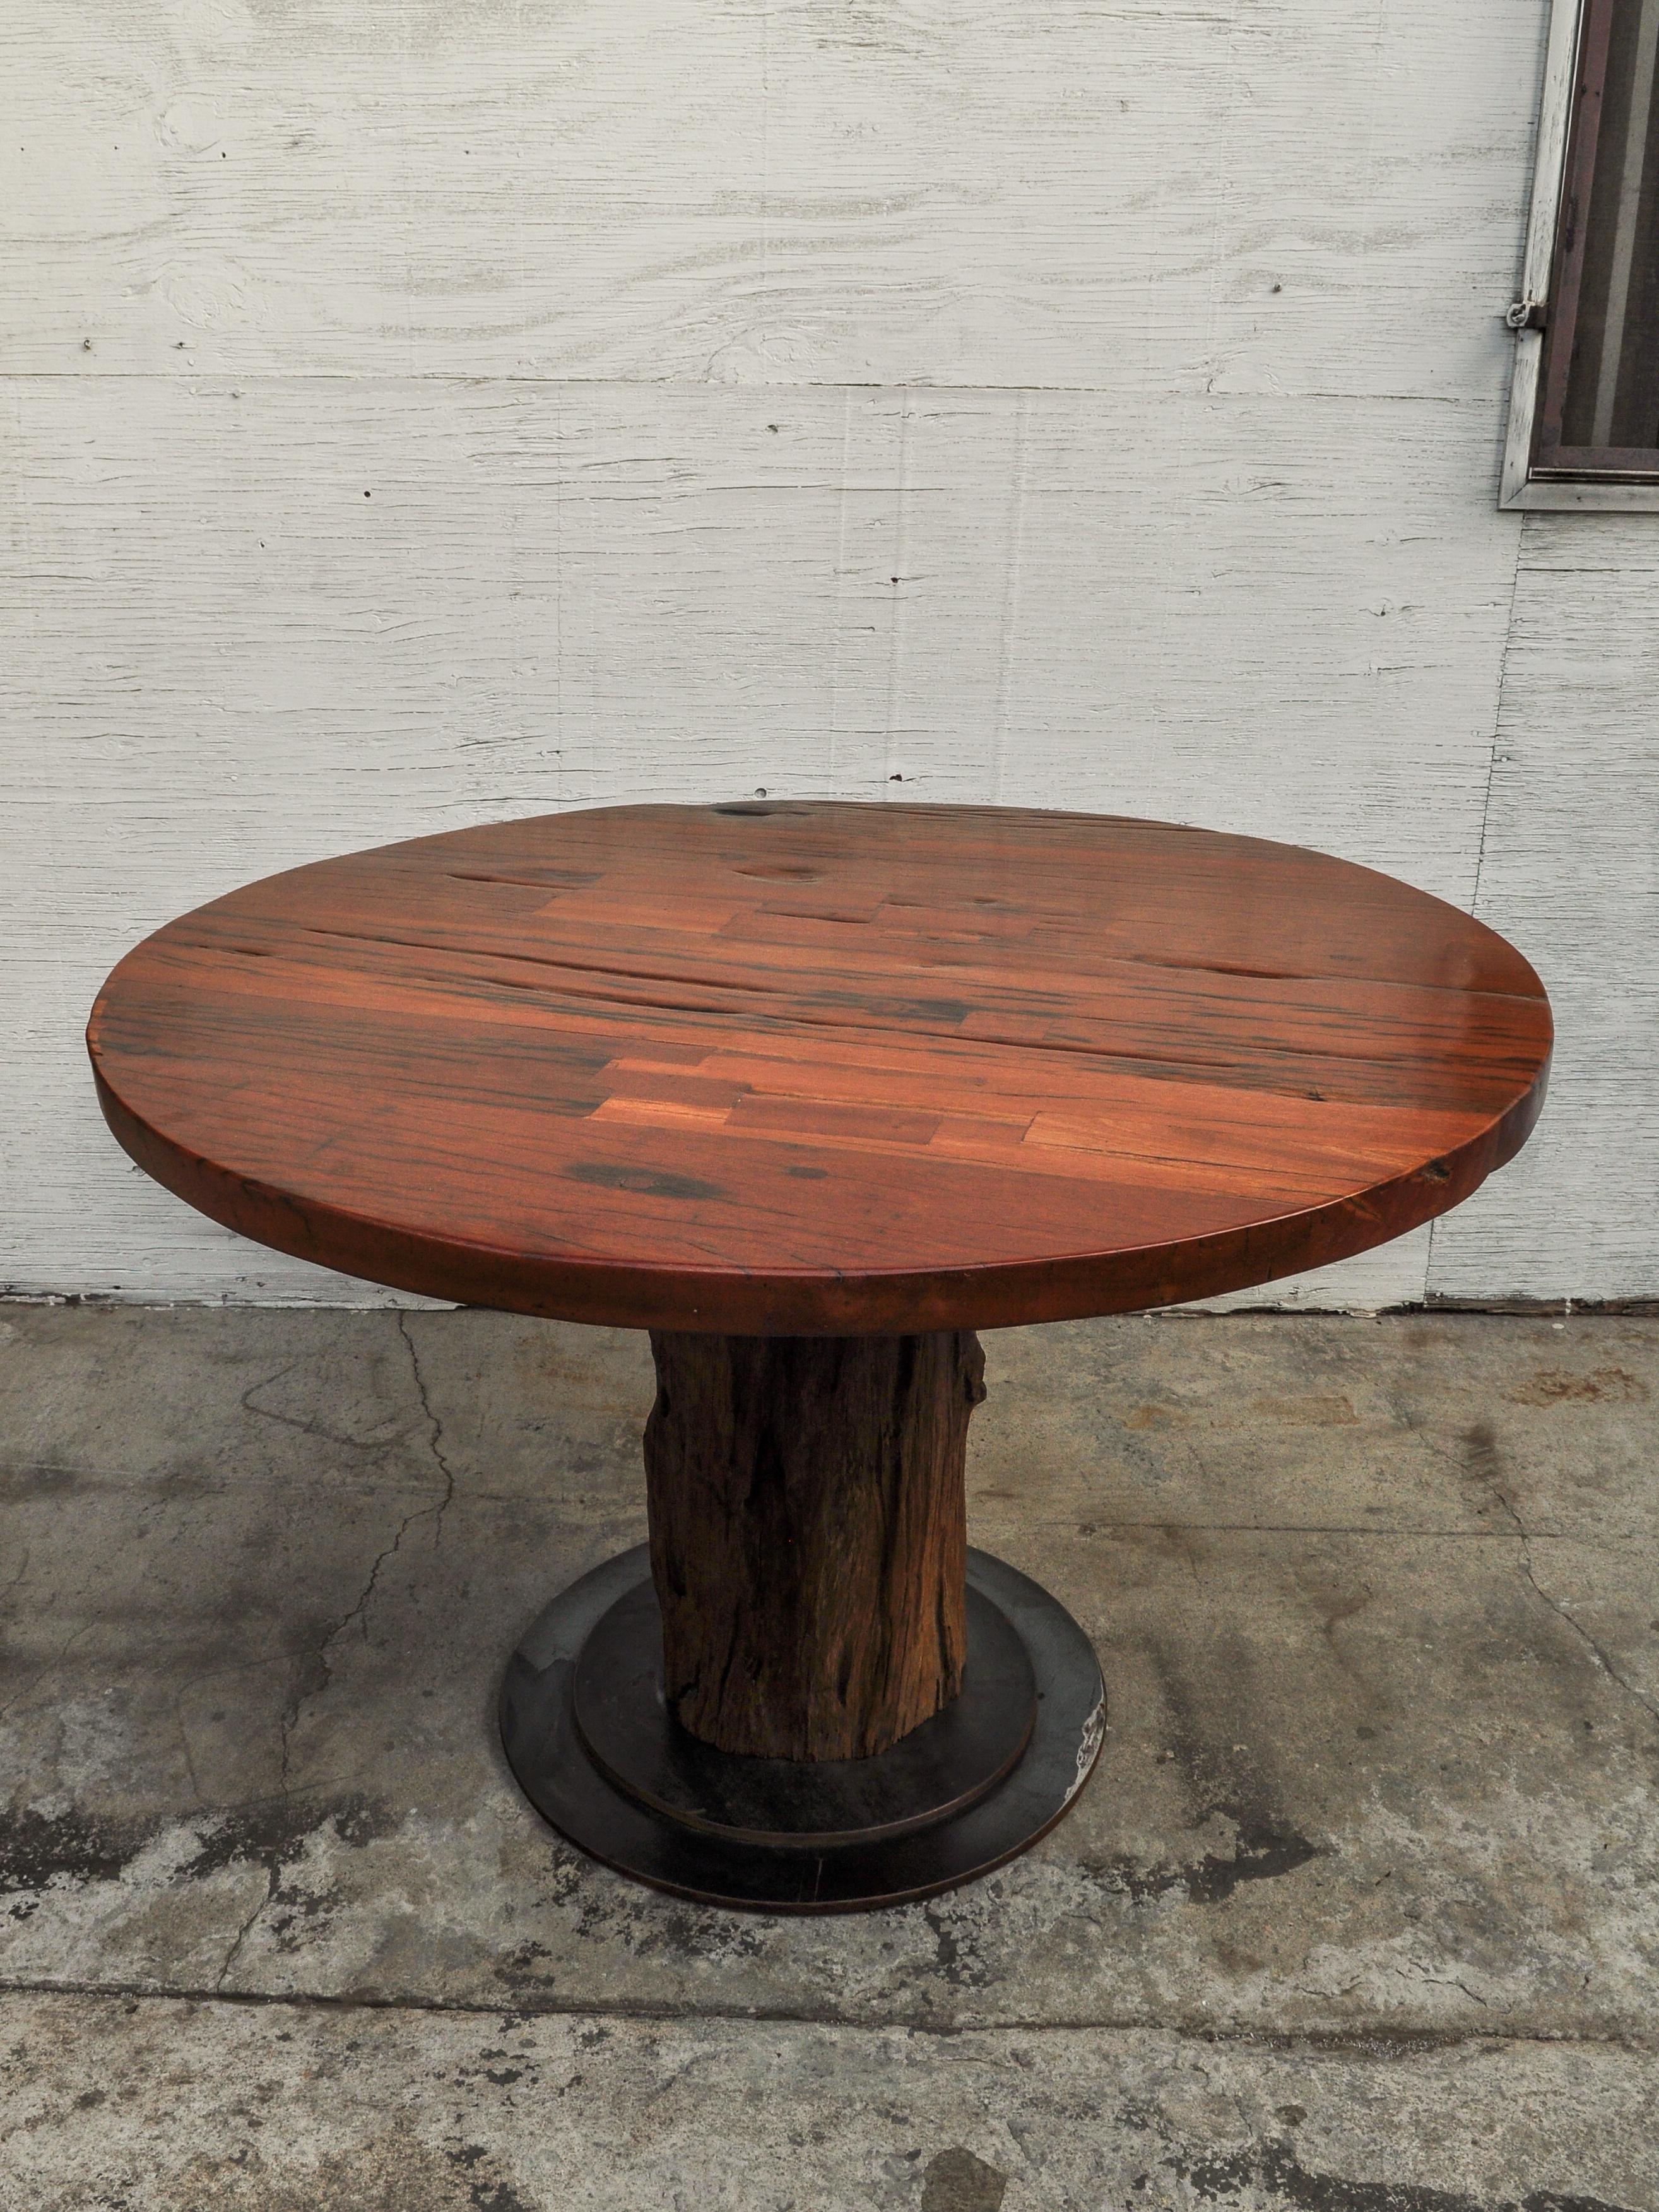 Rustic Round Table Recycled Bridge Wood with Tiered Steel Plate Base 1